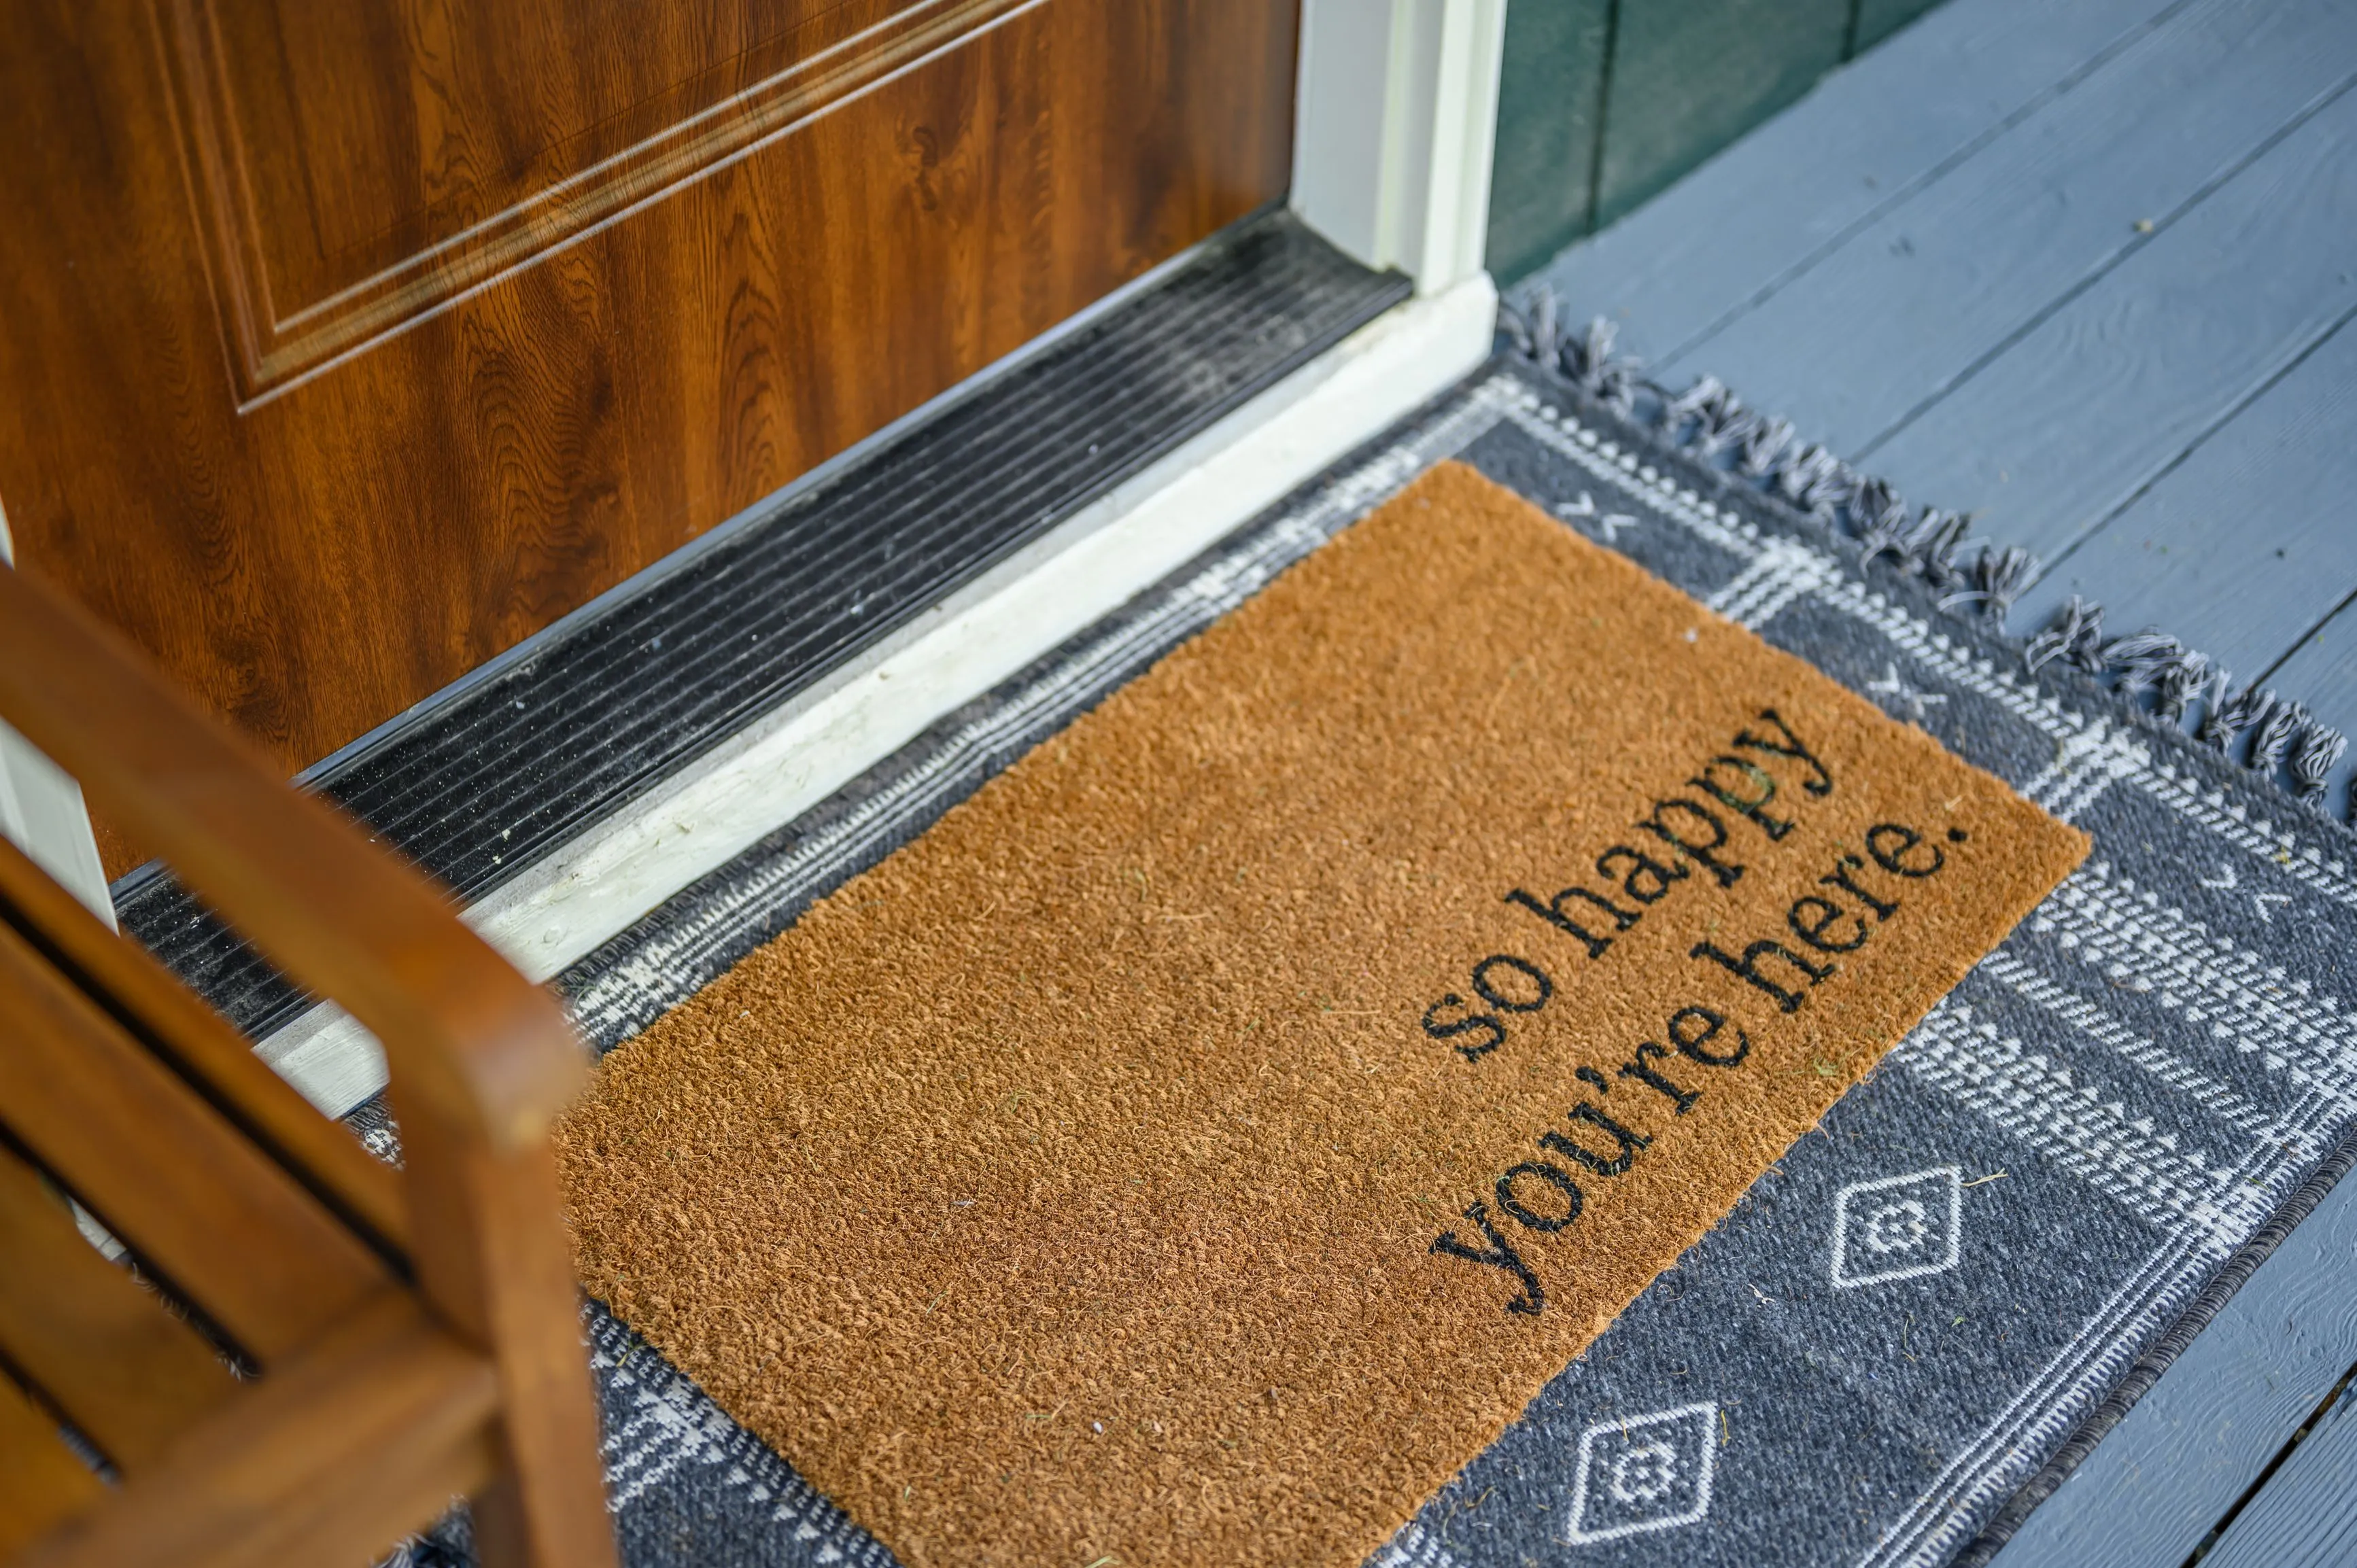 A welcoming doormat on a porch with the text "so happy you're here" layered over a patterned rug in front of a wood door.